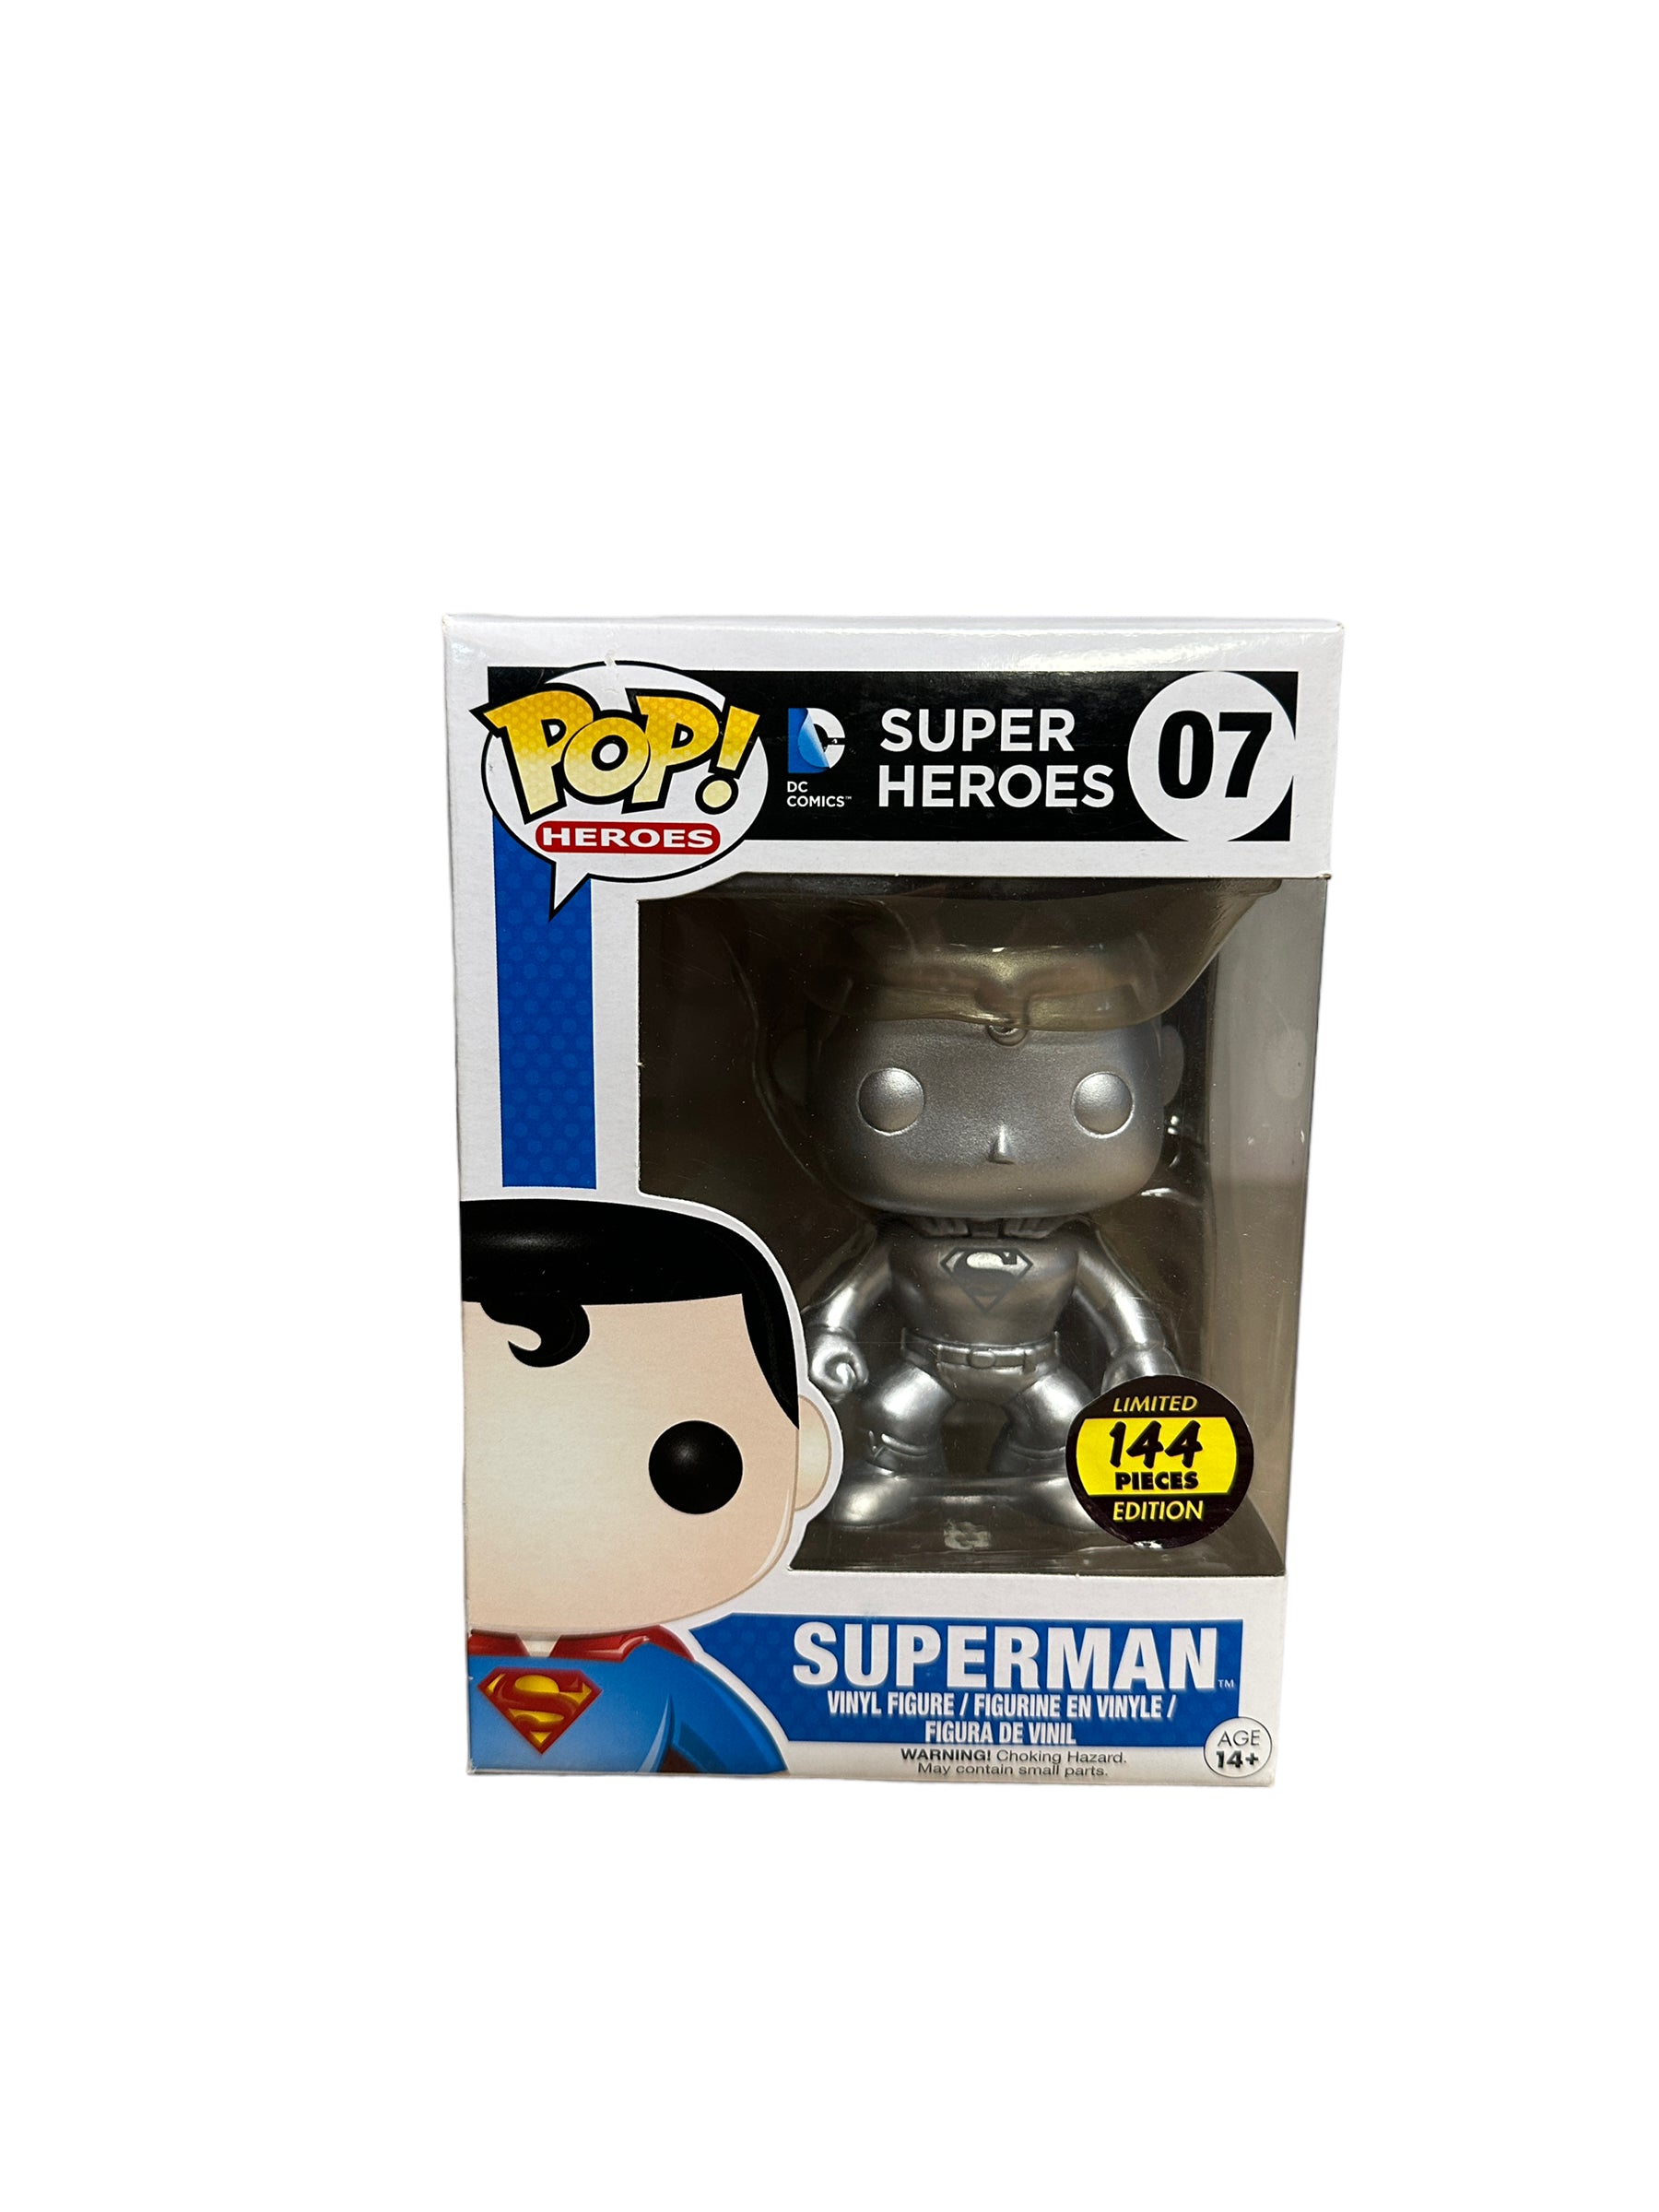 Superman #07 (Silver) Funko Pop! - DC Super Heroes - Hot Topic Employees Exclusive LE144 Pcs - Condition 6.5/10